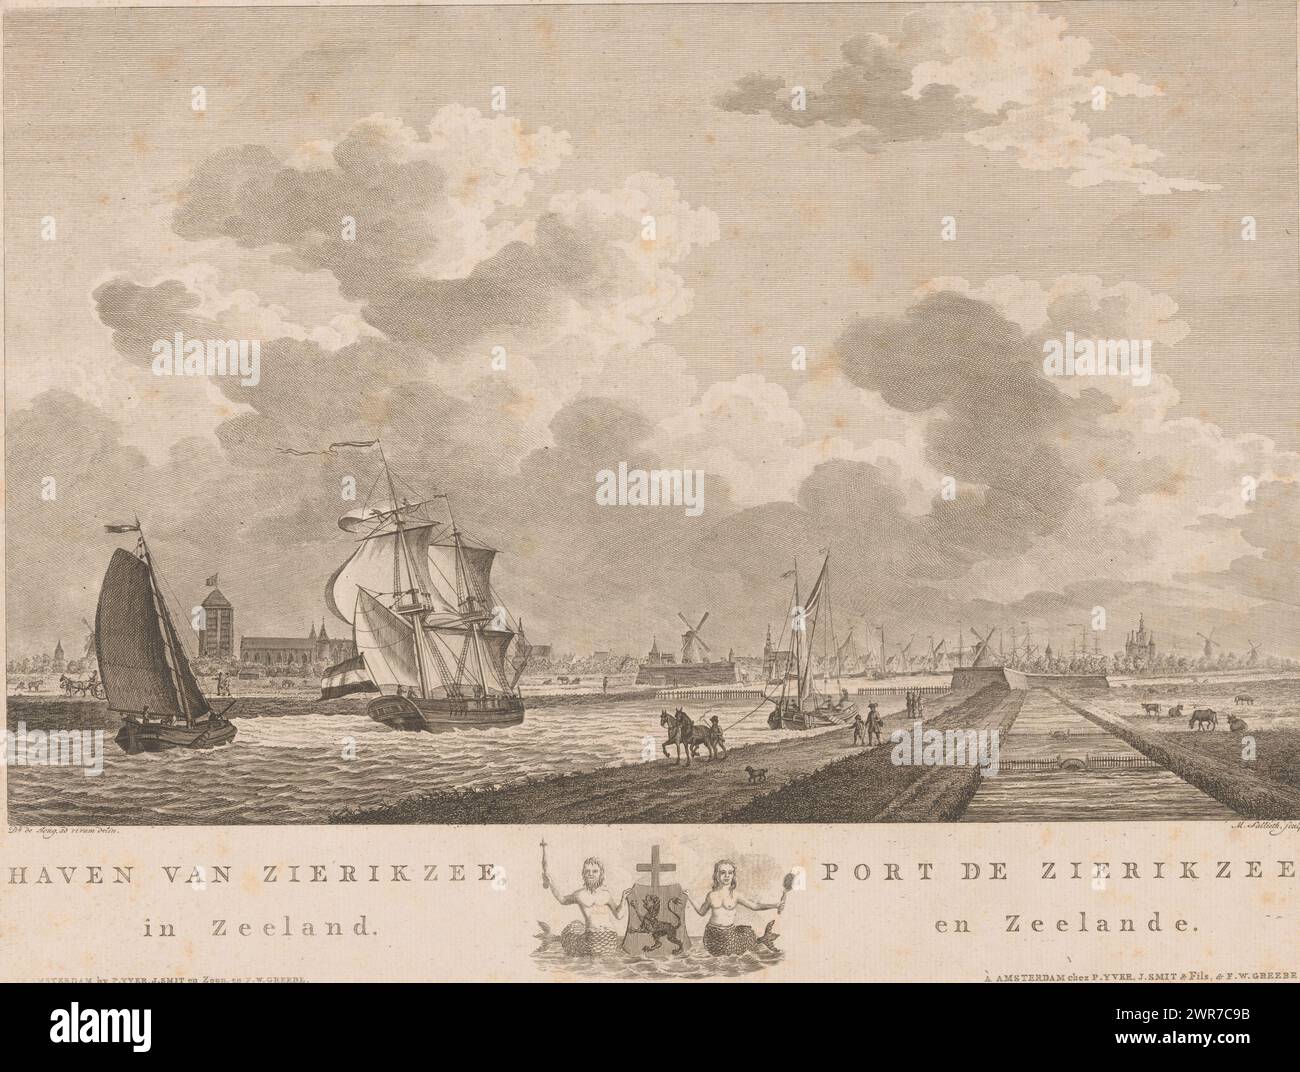 View of the port of Zierikzee, Port of Zierikzee, in Zeeland / Port de Zierikzee, and Zeelande (title on object), Views of Dutch ports (series title), View of the port of Zierikzee with different boats. On the left in the background is the Sint-Lievensmonsterkerk. In the margin the title in Dutch and French with the city's coat of arms in the middle. Numbered top right: 20., print maker: Mathias de Sallieth, after drawing by: Dirk de Jong, publisher: Pieter Yver, after drawing by: Zierikzee, publisher: Amsterdam, publisher: Amsterdam, publisher : Amsterdam, 1779 - 1787, paper Stock Photo